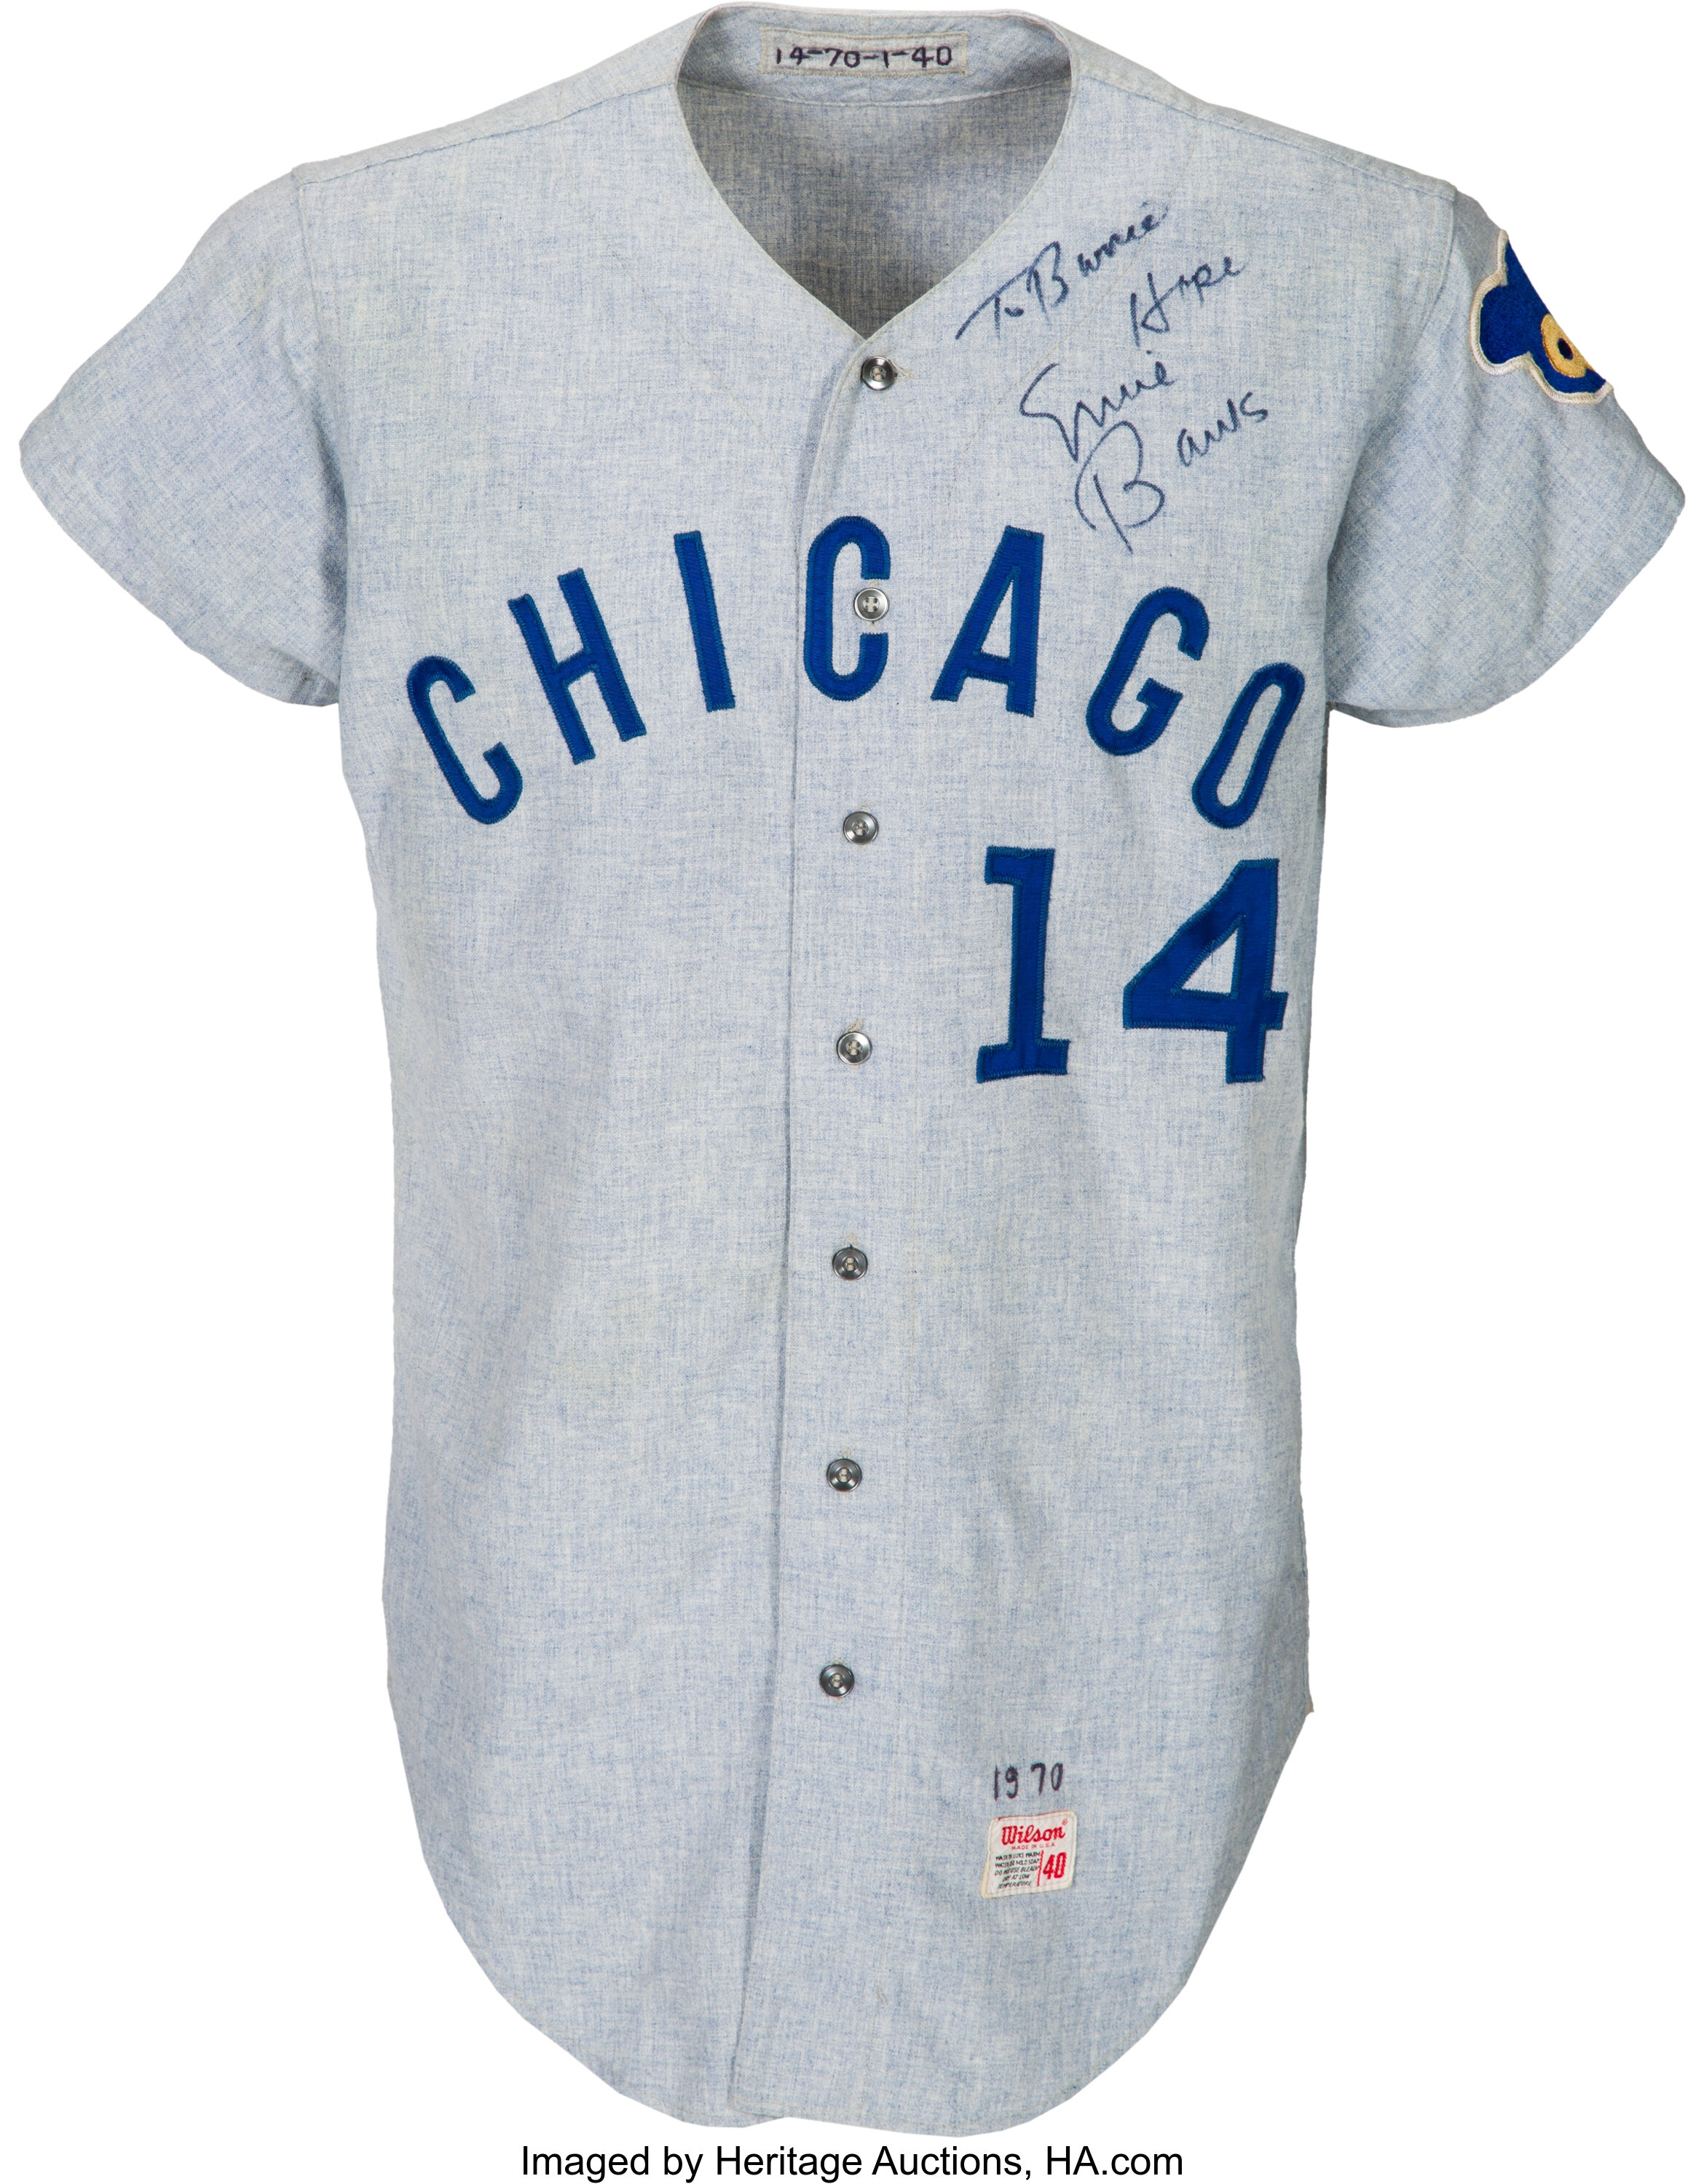 1970 Ernie Banks Game Worn Chicago Cubs Jersey, MEARS A10., Lot #80011